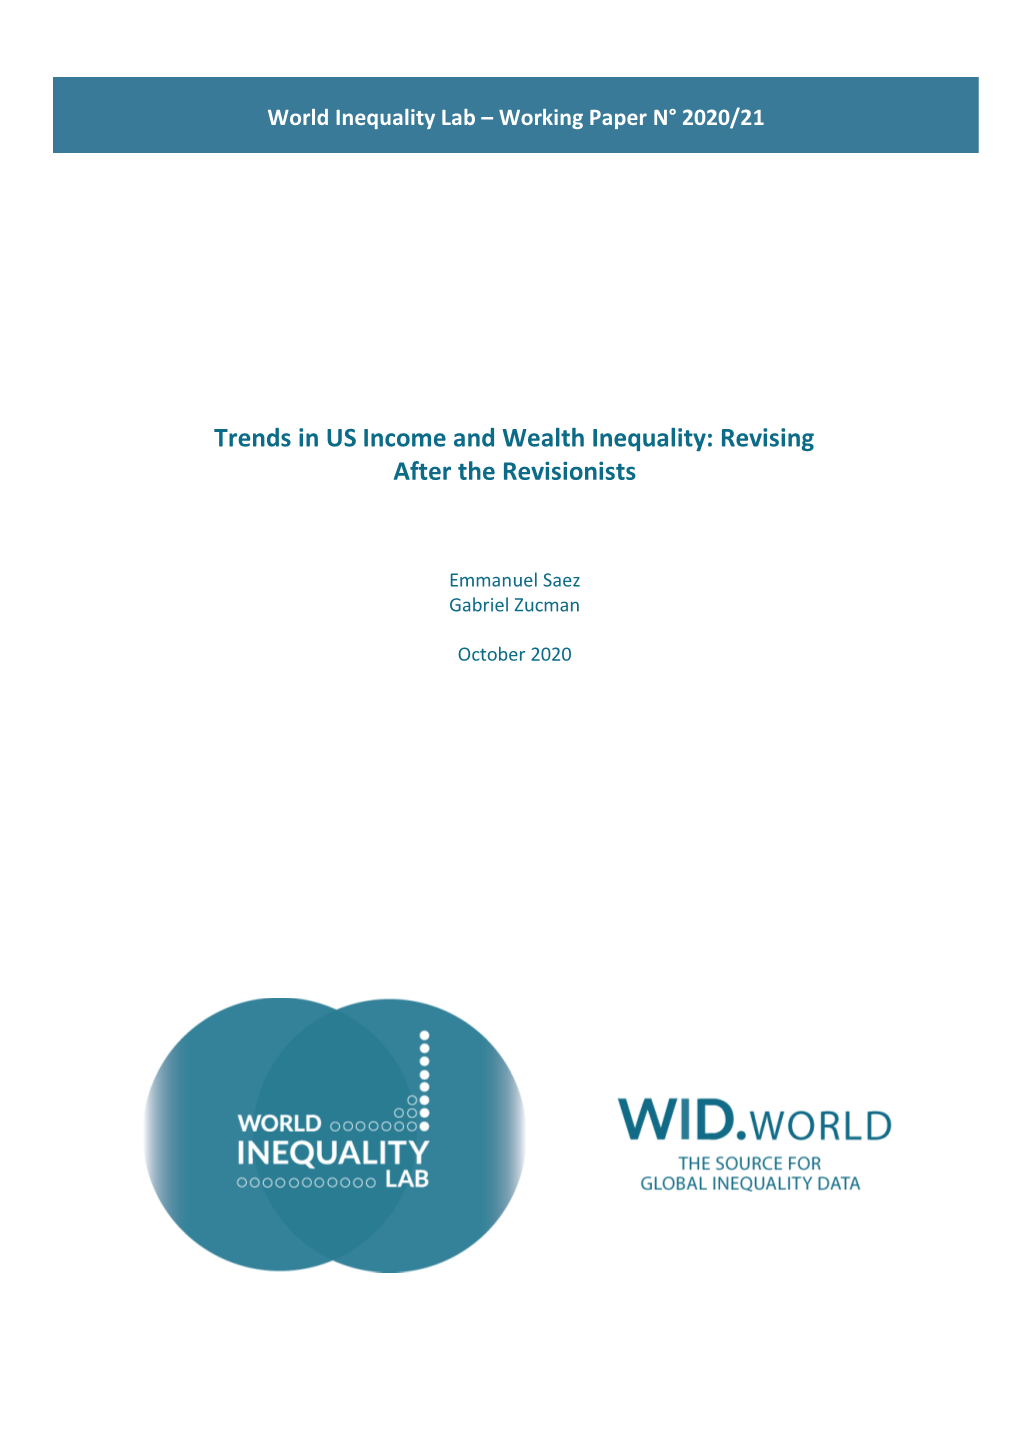 Trends in US Income and Wealth Inequality: Revising After the Revisionists